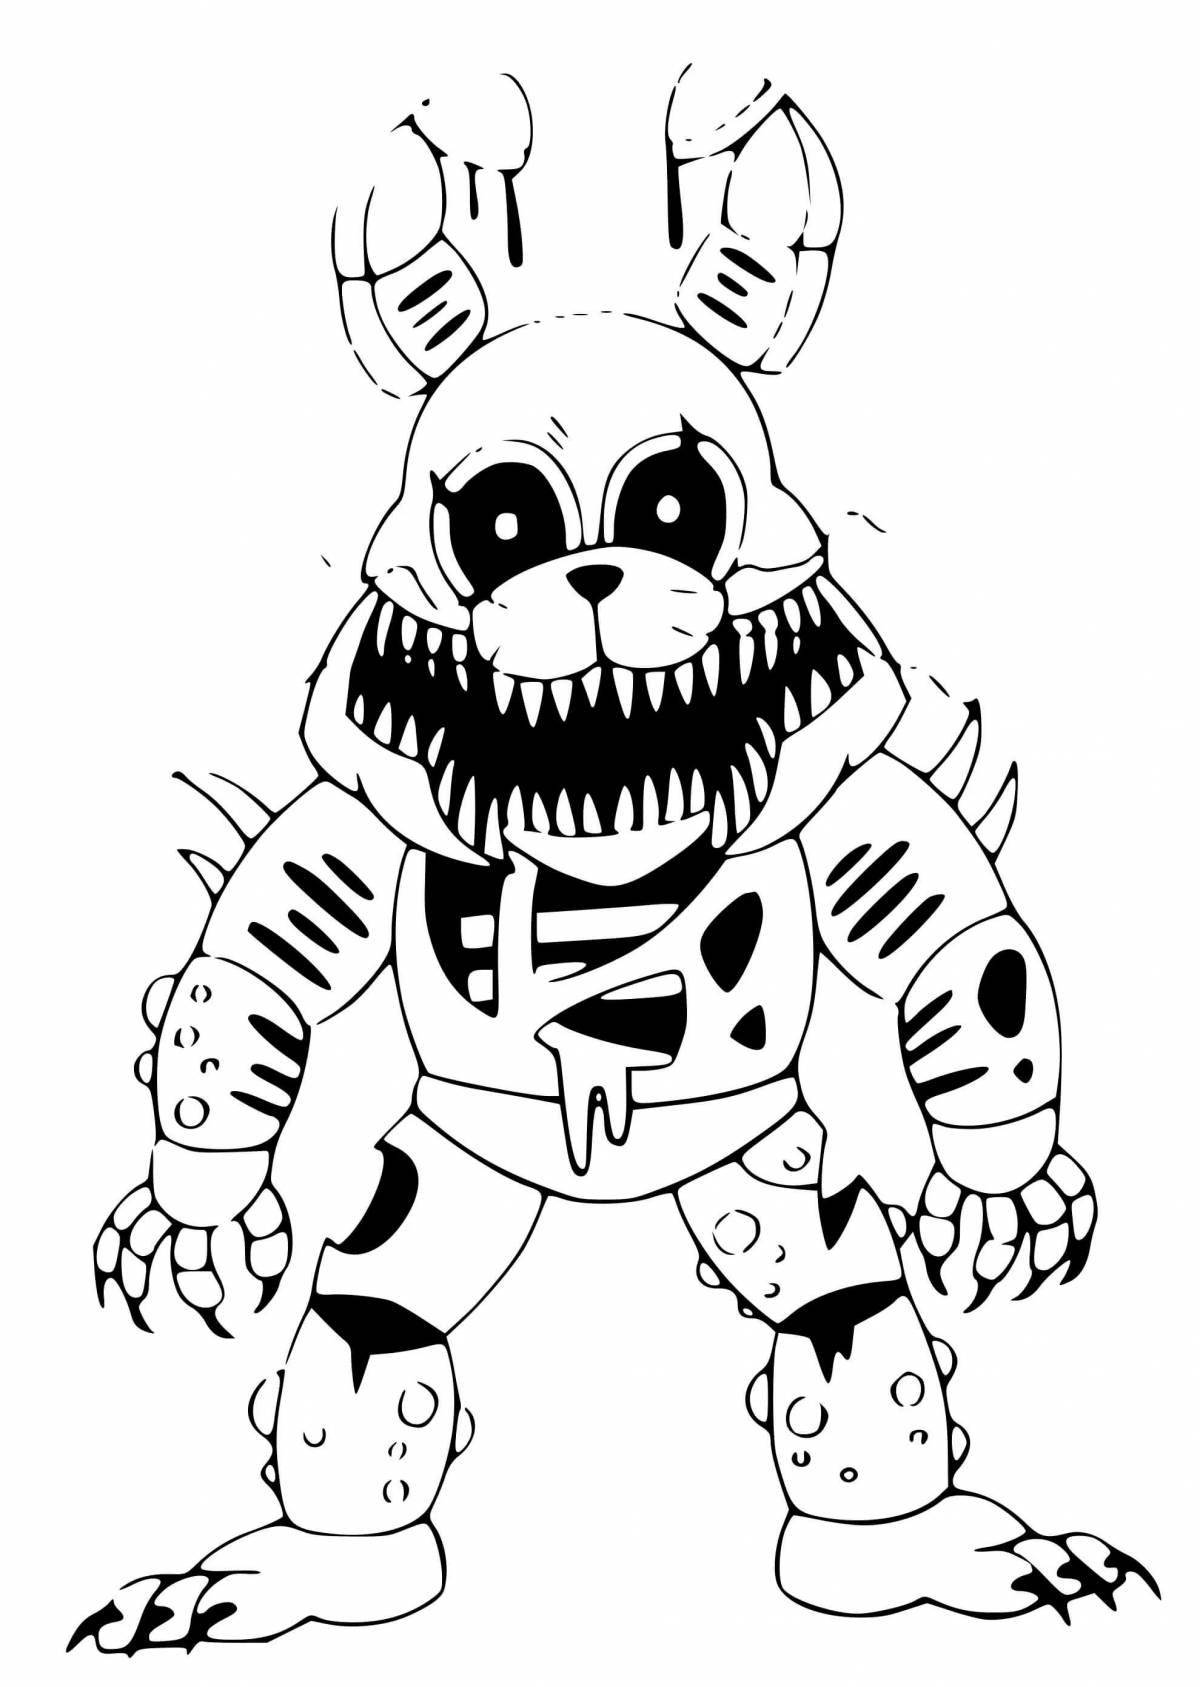 Cute animatronic twisted coloring page